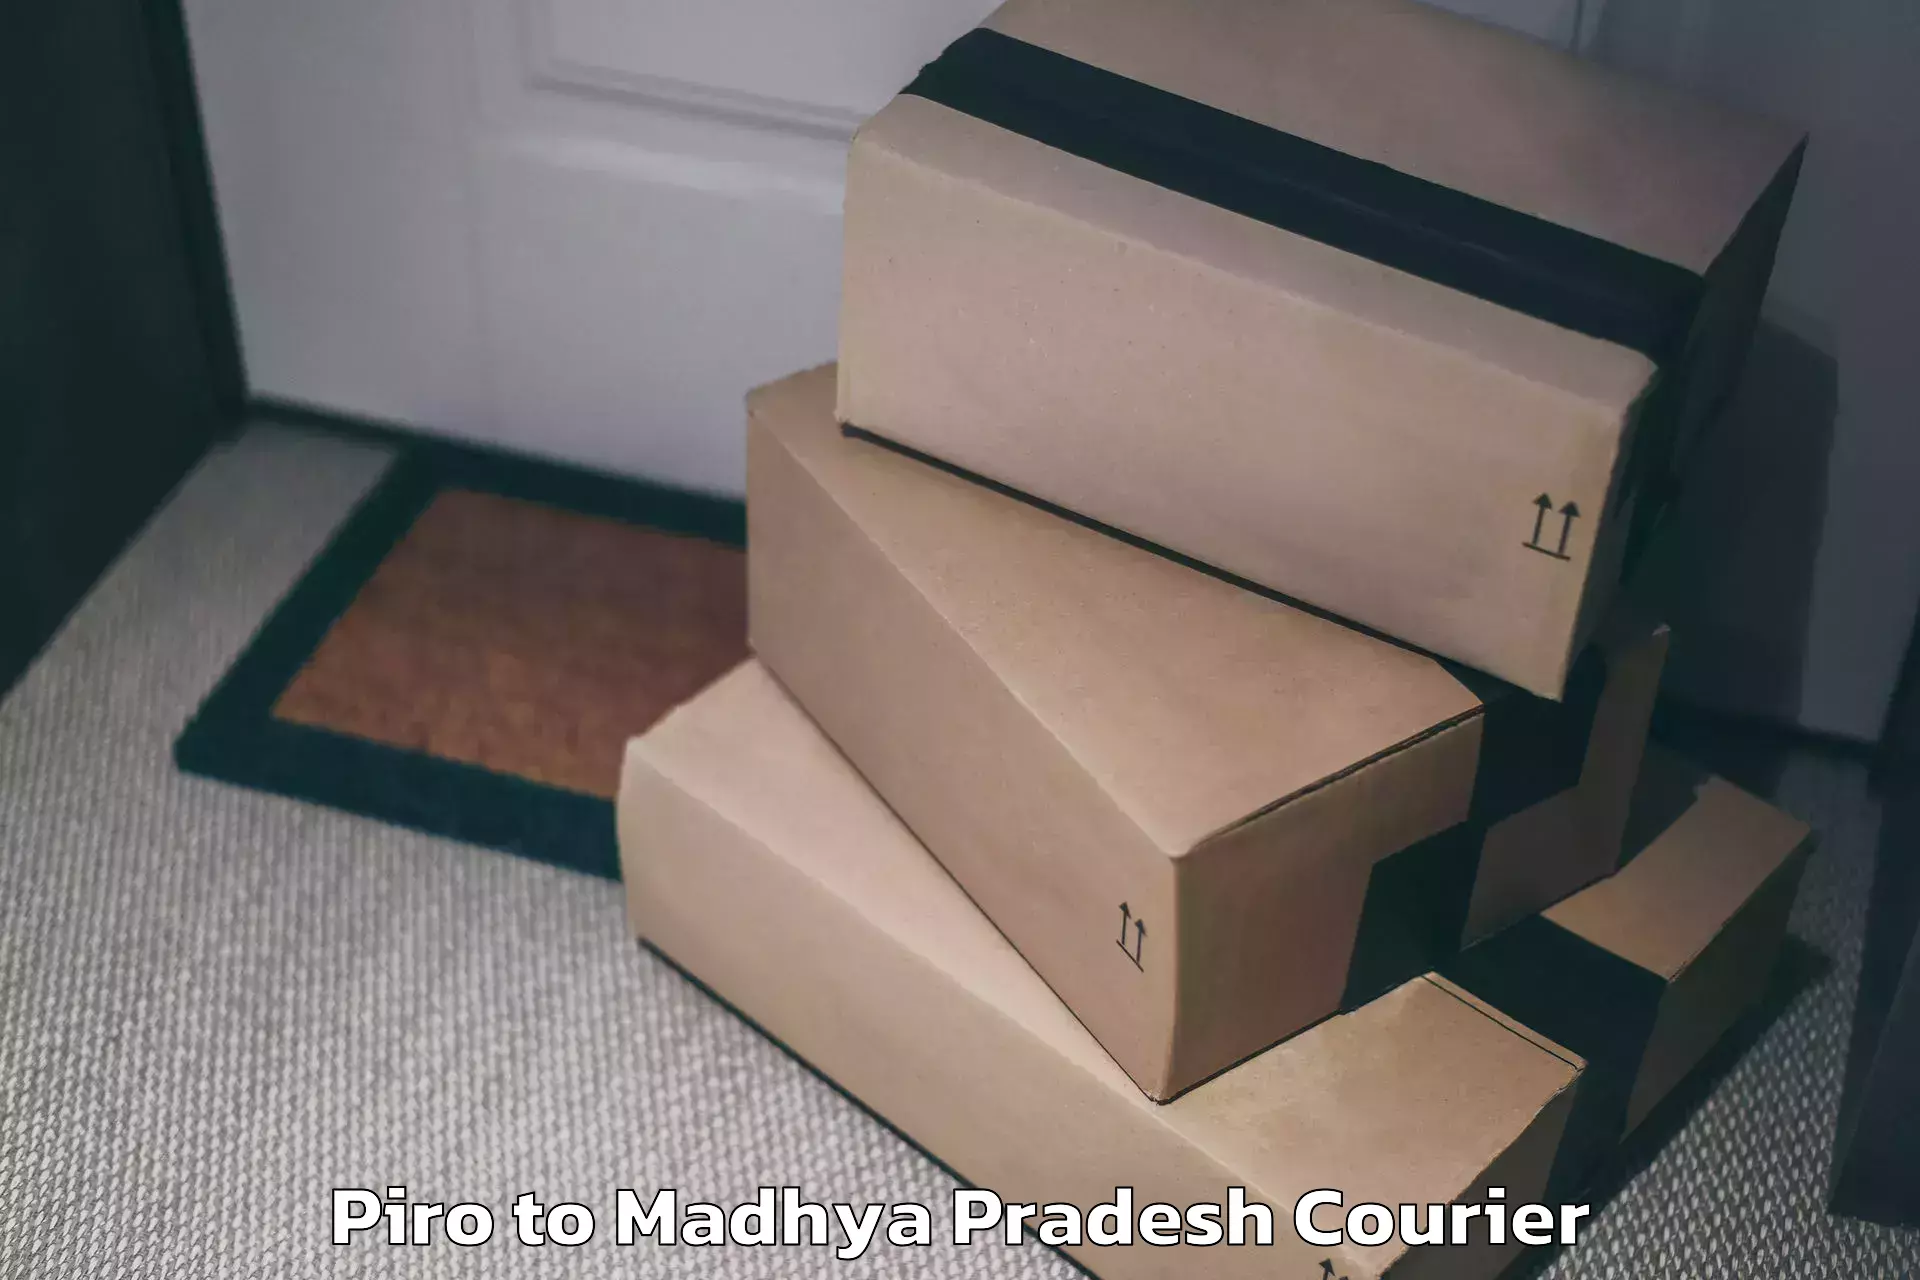 Baggage delivery scheduling in Piro to Madhya Pradesh